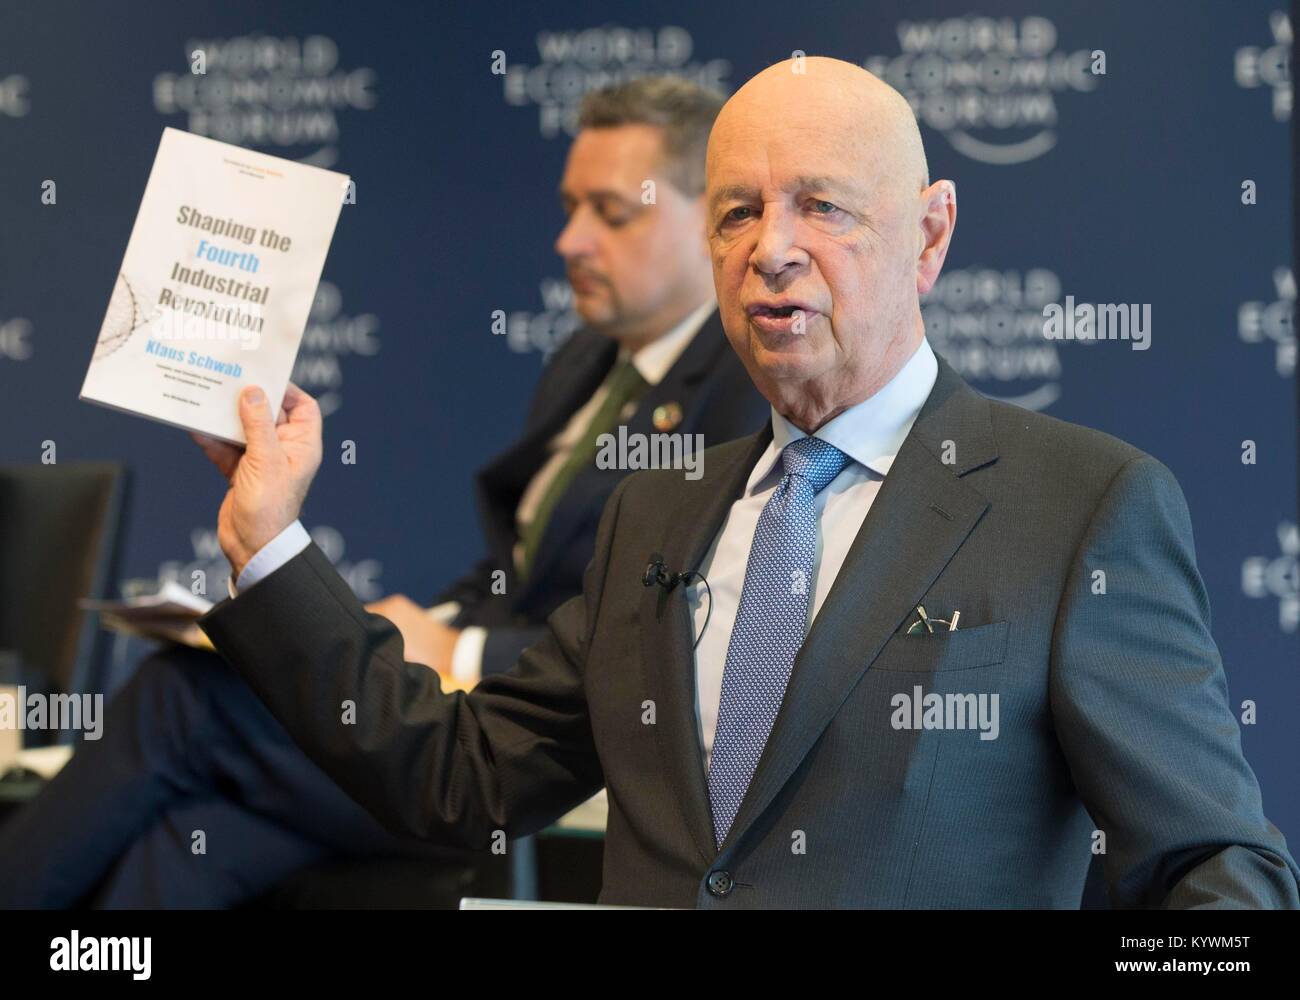 Geneva, Switzerland. 16th Jan, 2018. Founder and Chief Executive of the World Economic Forum (WEF) Klaus Schwab gestures at a press conference in Geneva, Switzerland, Jan. 16, 2018. Some 70 heads of state and government and 38 heads of international organizations will debate 'creating a shared future in a fractured world' -- the theme of this year's World Economic Forum in Davos from Jan. 23 to Jan. 26. Credit: Xu Jinquan/Xinhua/Alamy Live News Stock Photo